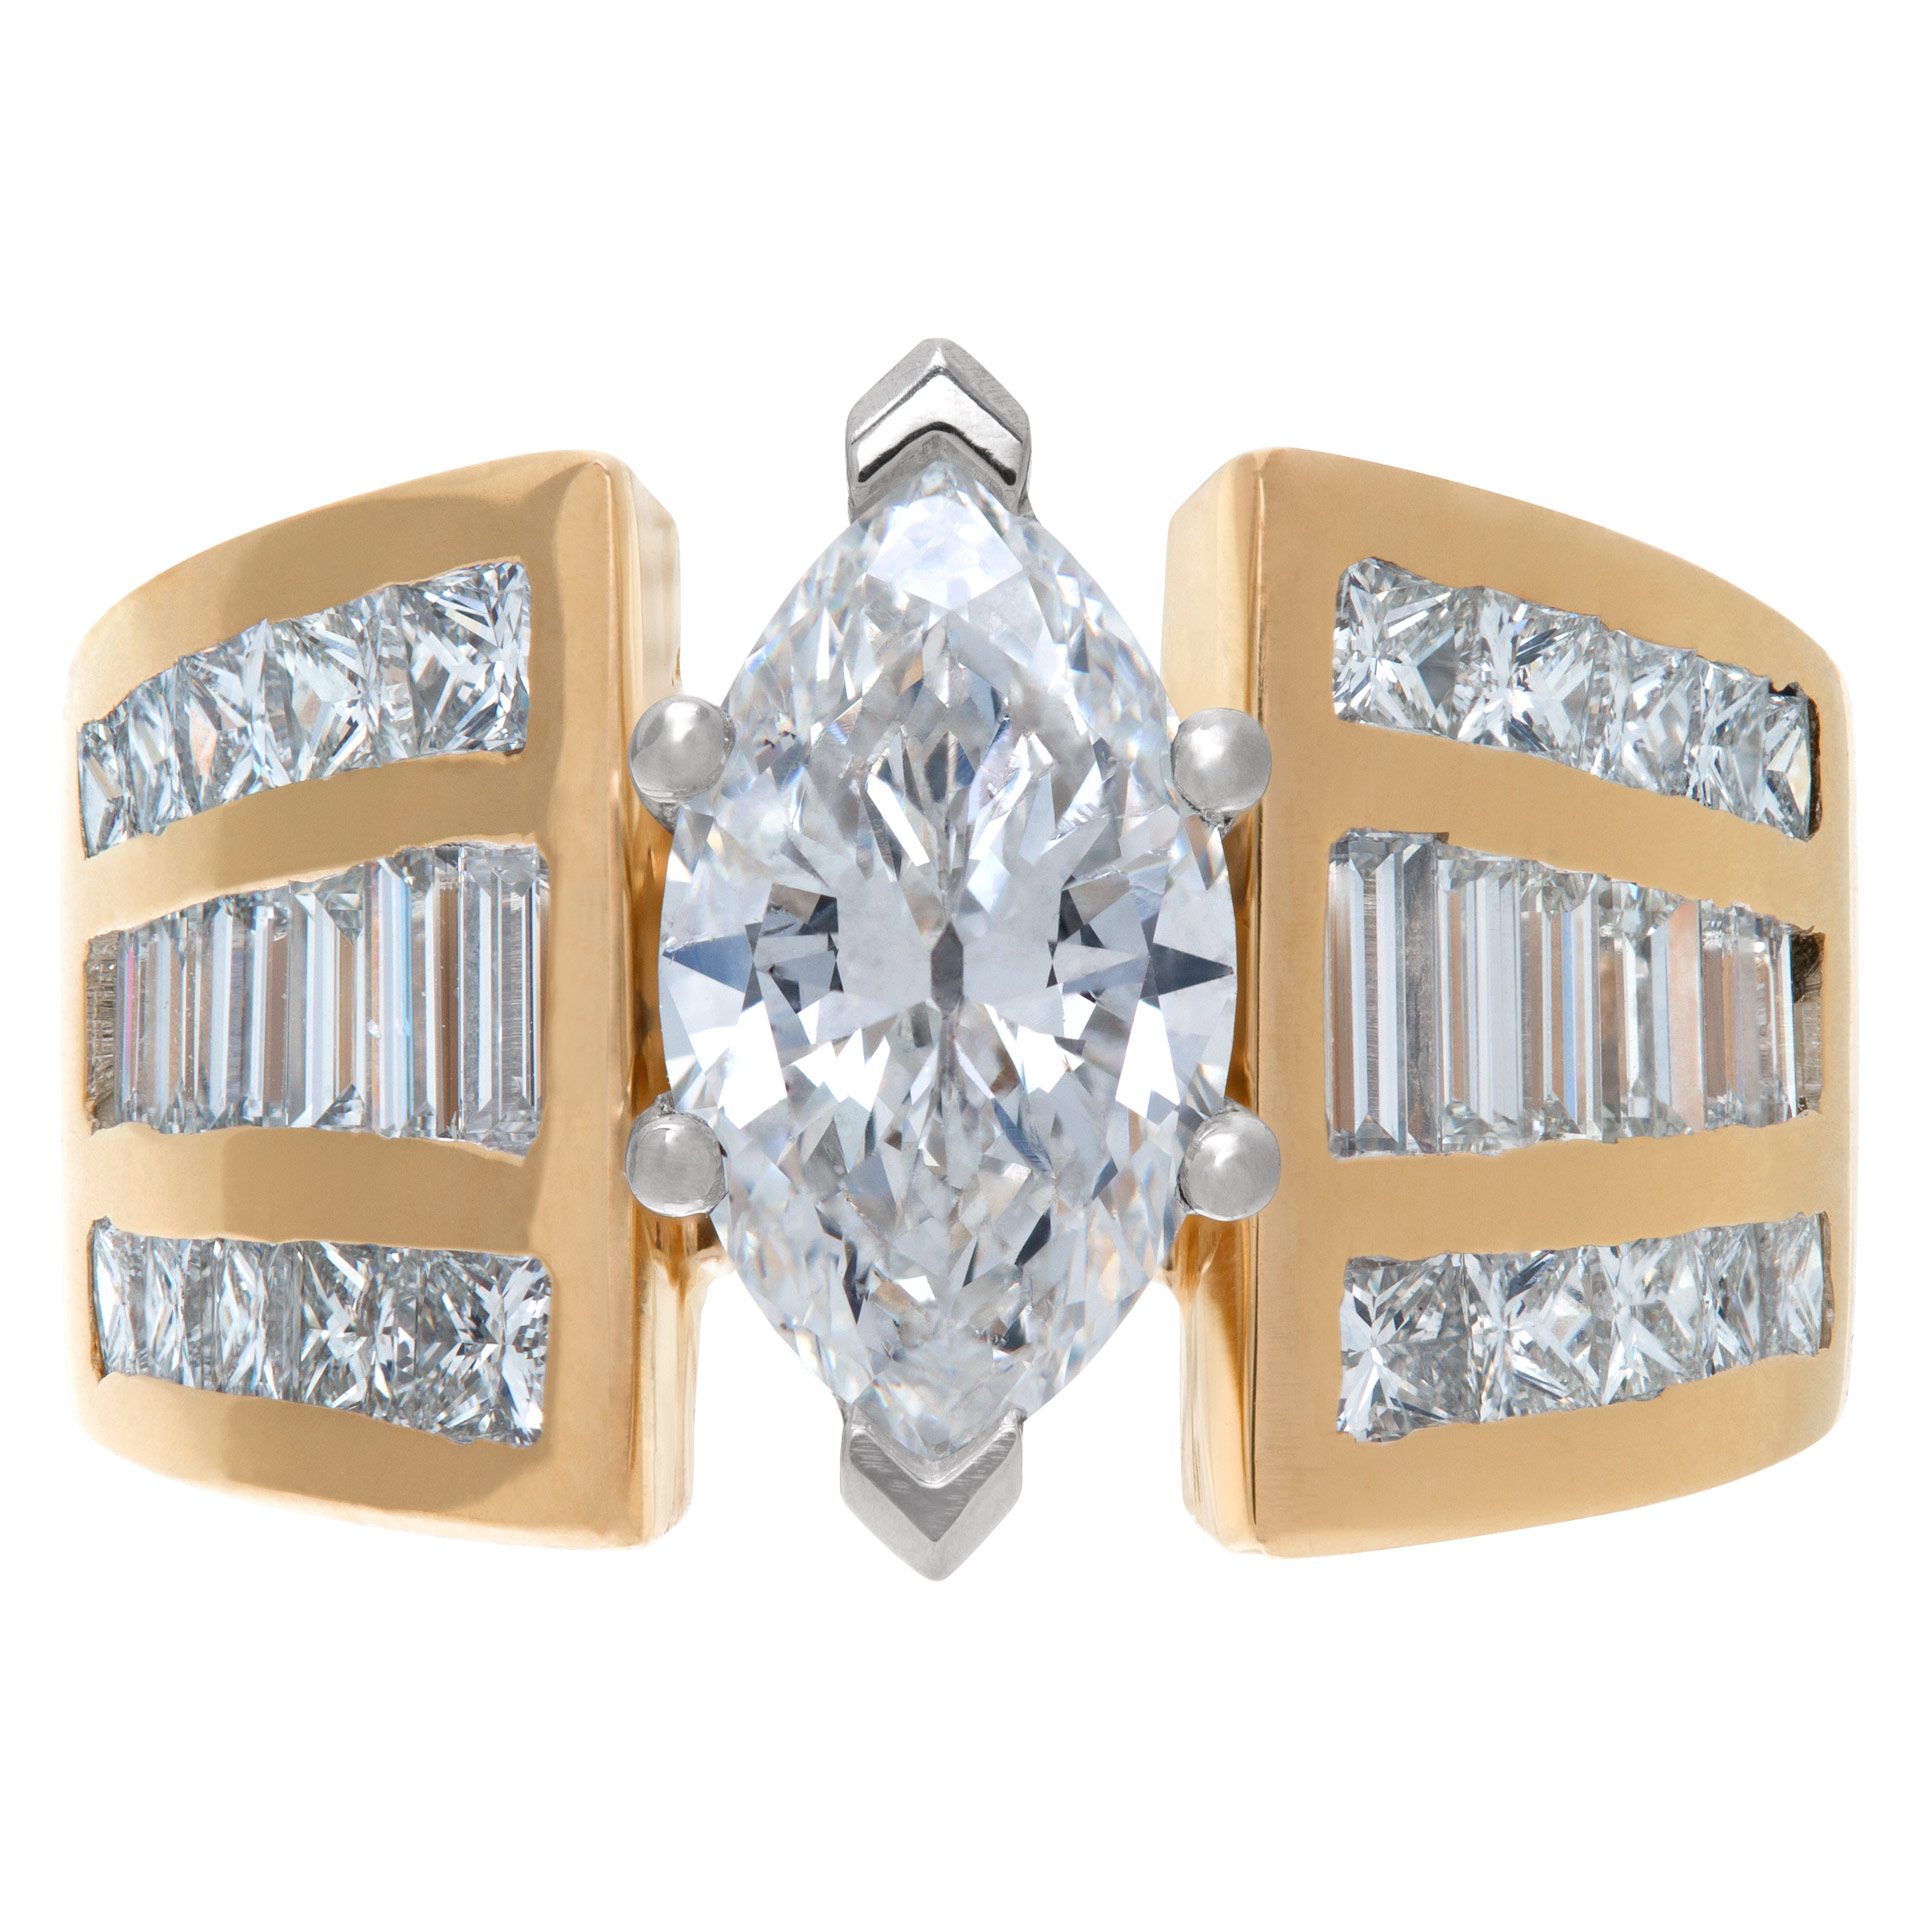 Marquise diamond 1.52 carats F Color, SI2 clarity in a 14k yellow gold and platinum setting with approx. 2 carats in side diamonds